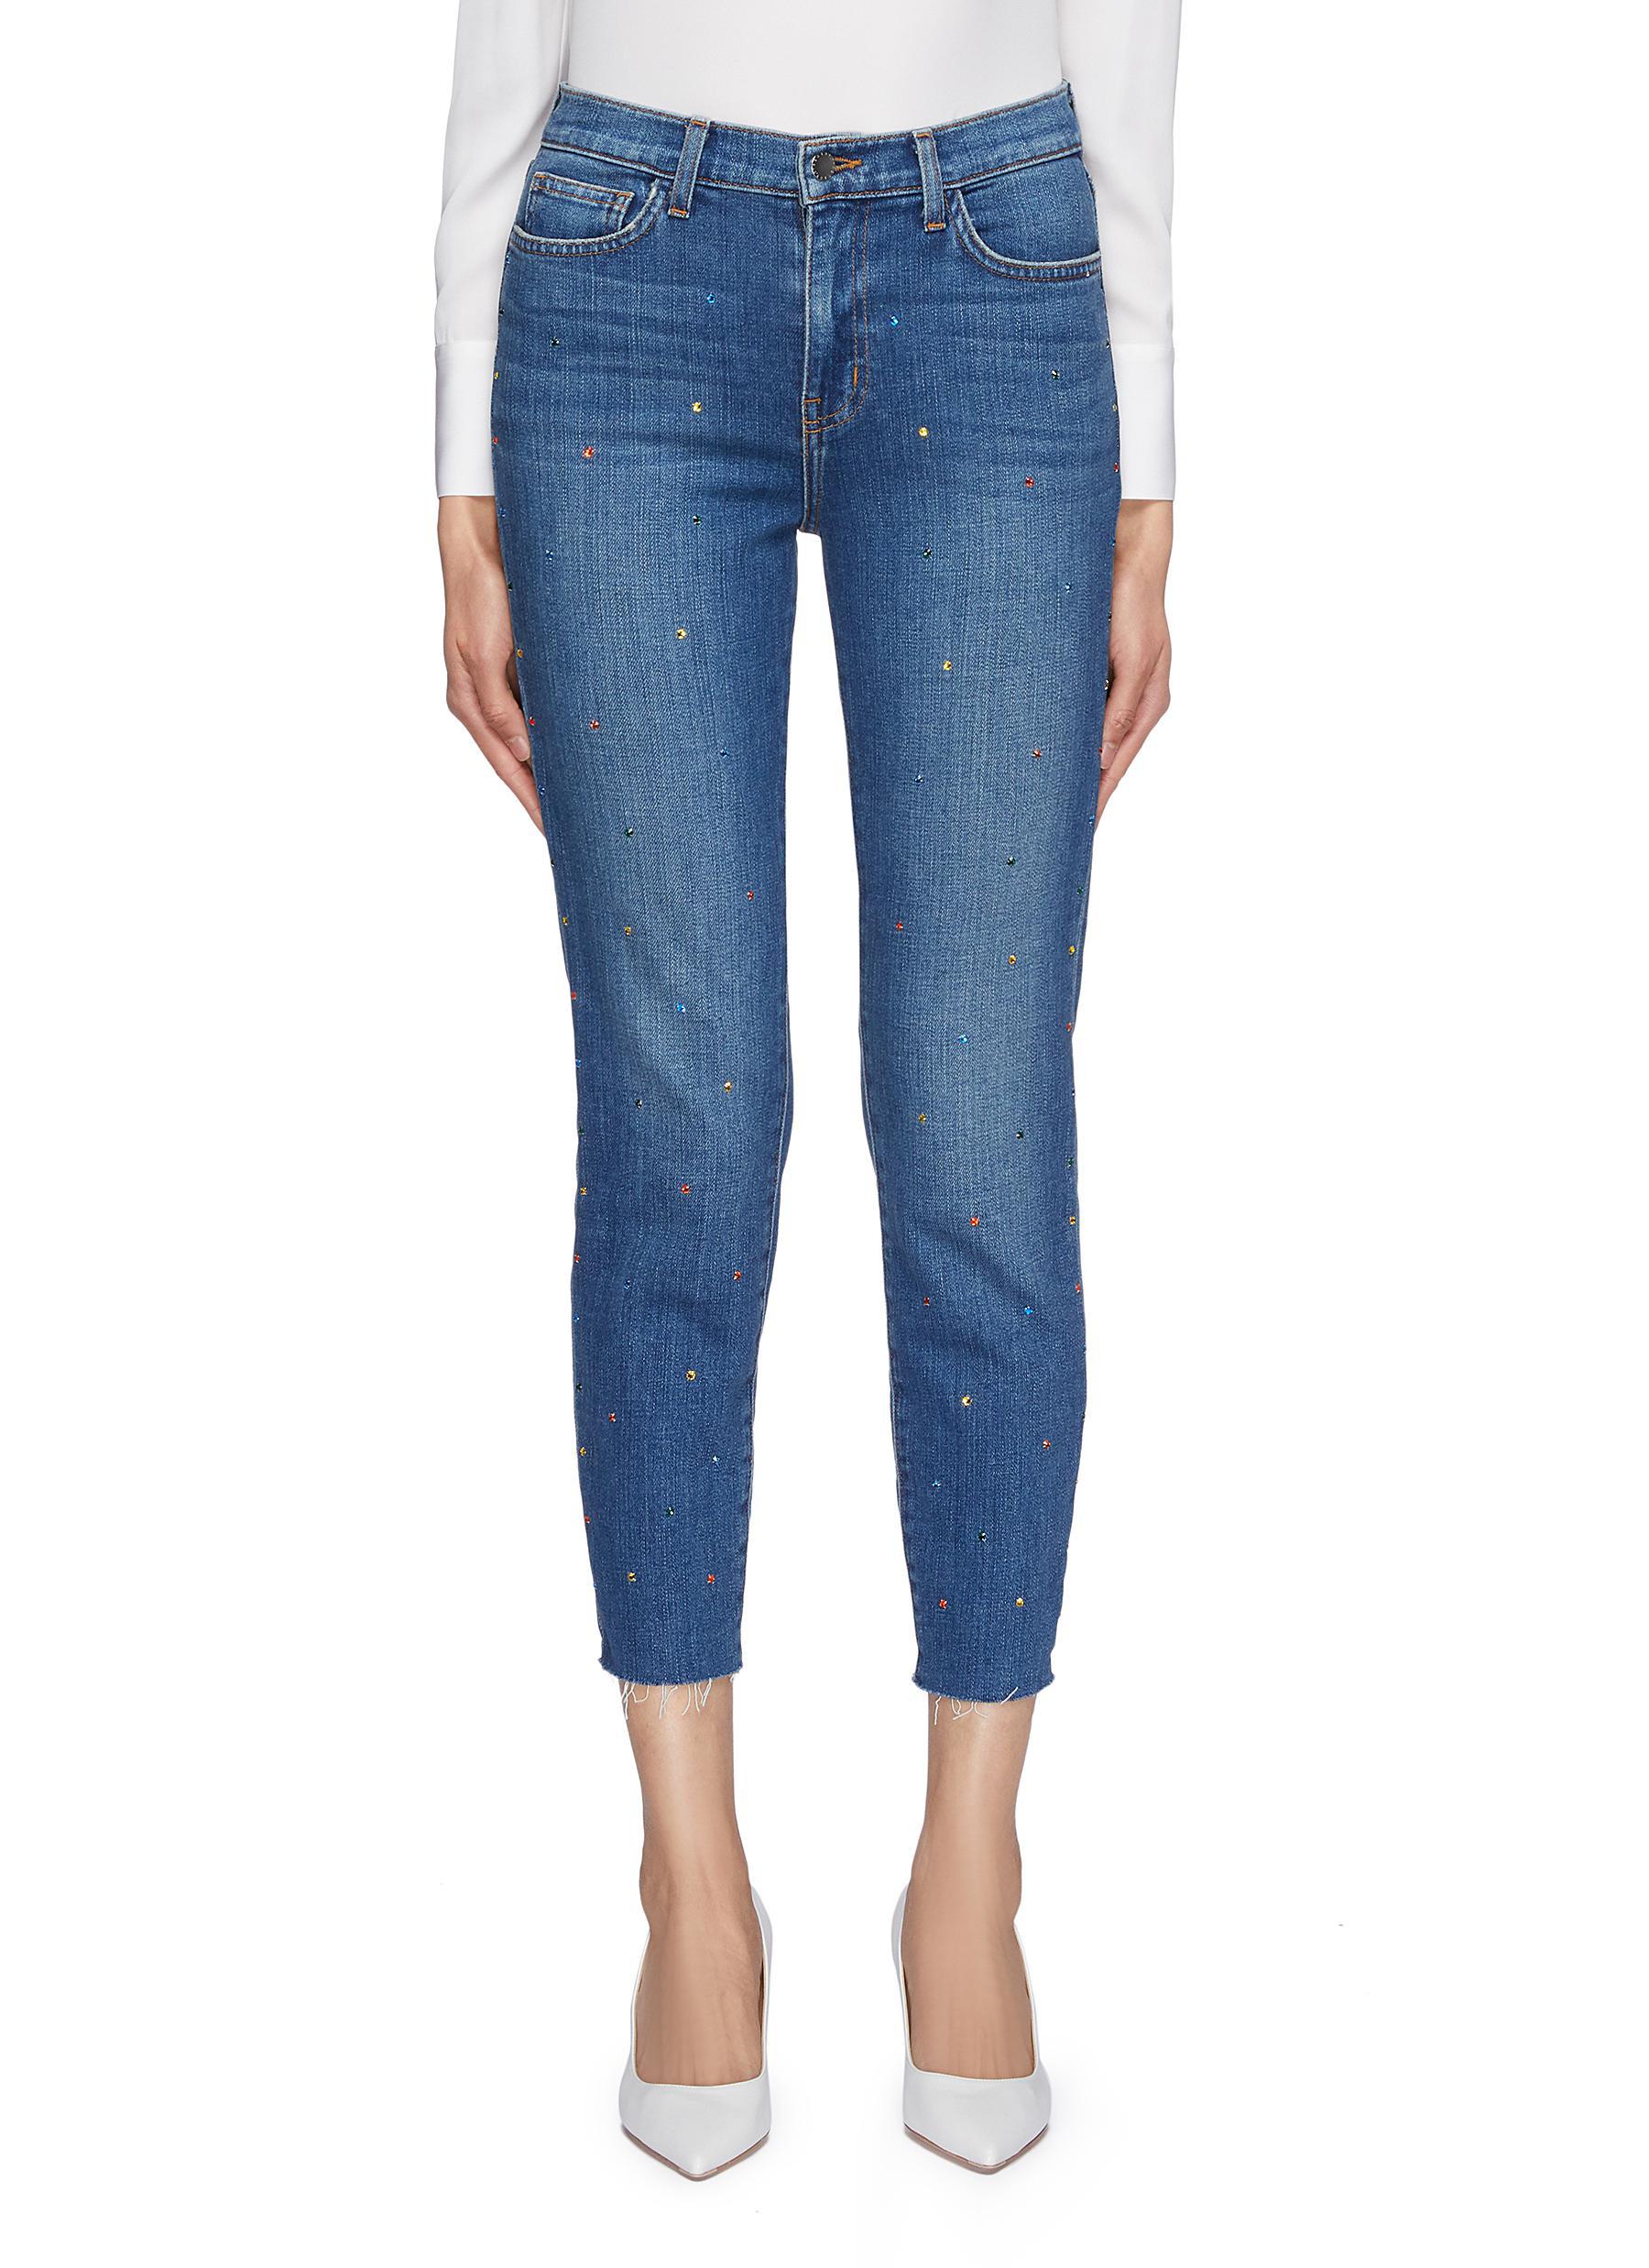 Lyst - L'Agence 'el Matador' Strass Slim Fit Cropped Jeans in Blue